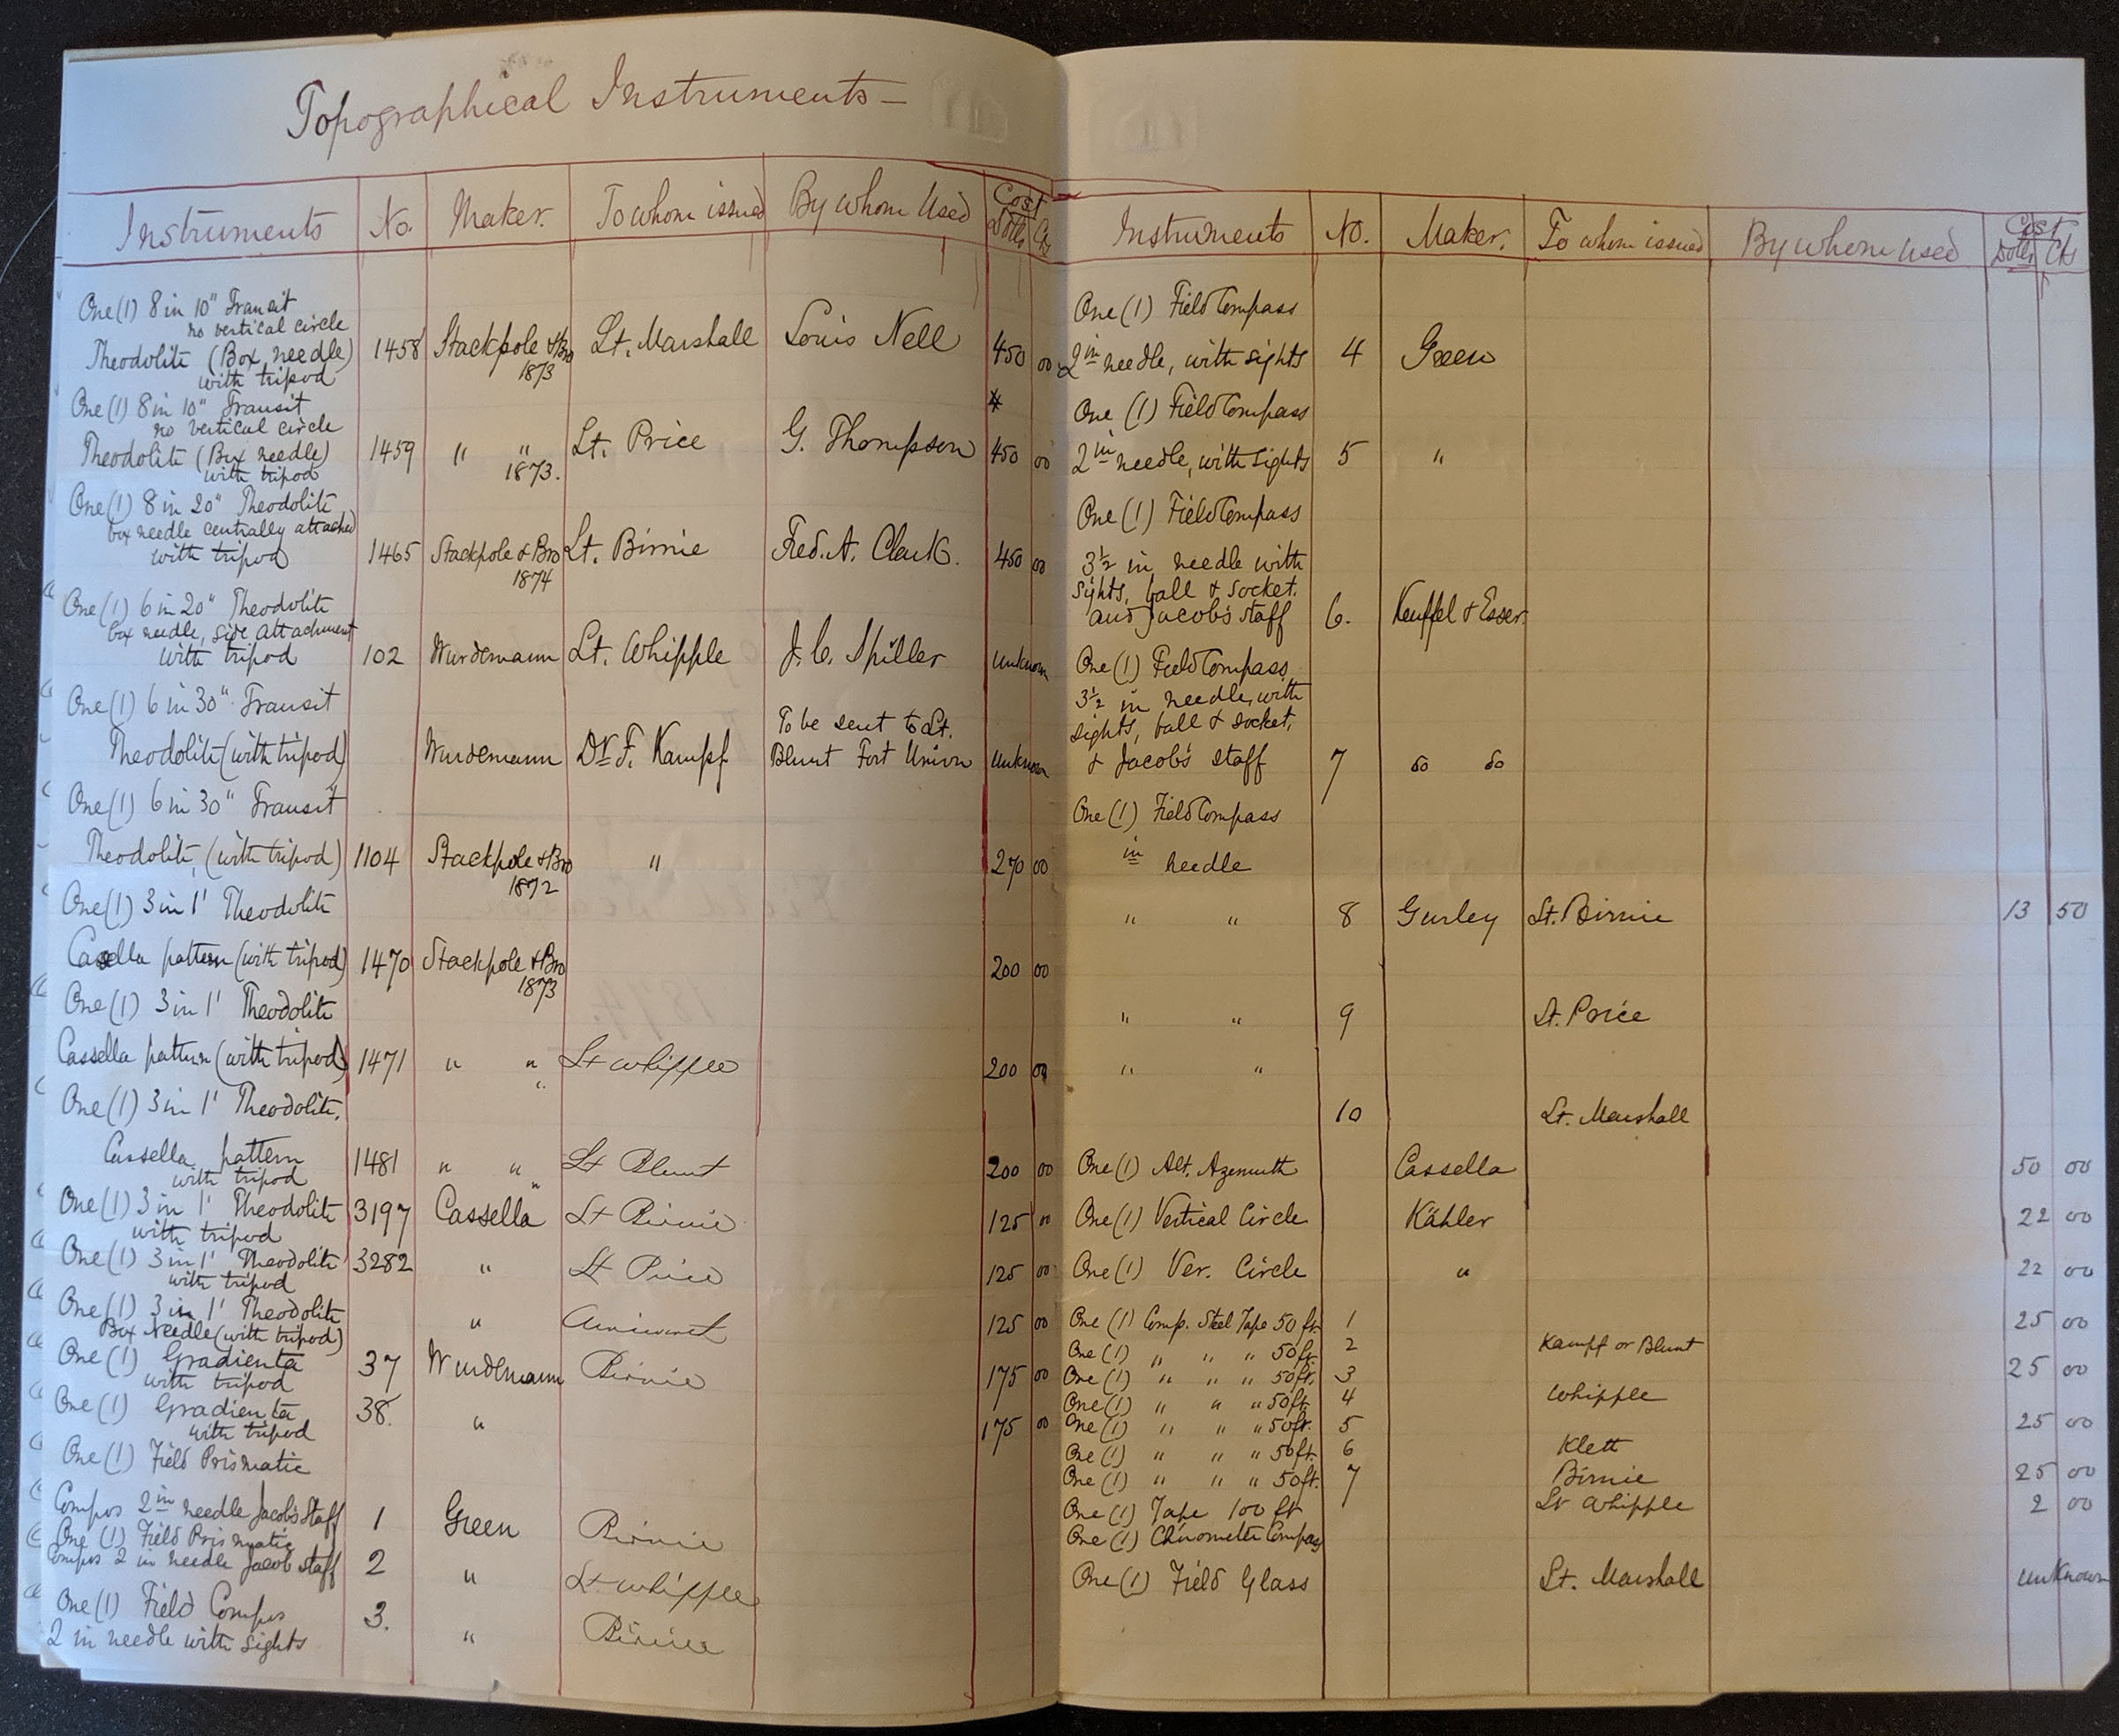 Two pages of a handwritten ledger